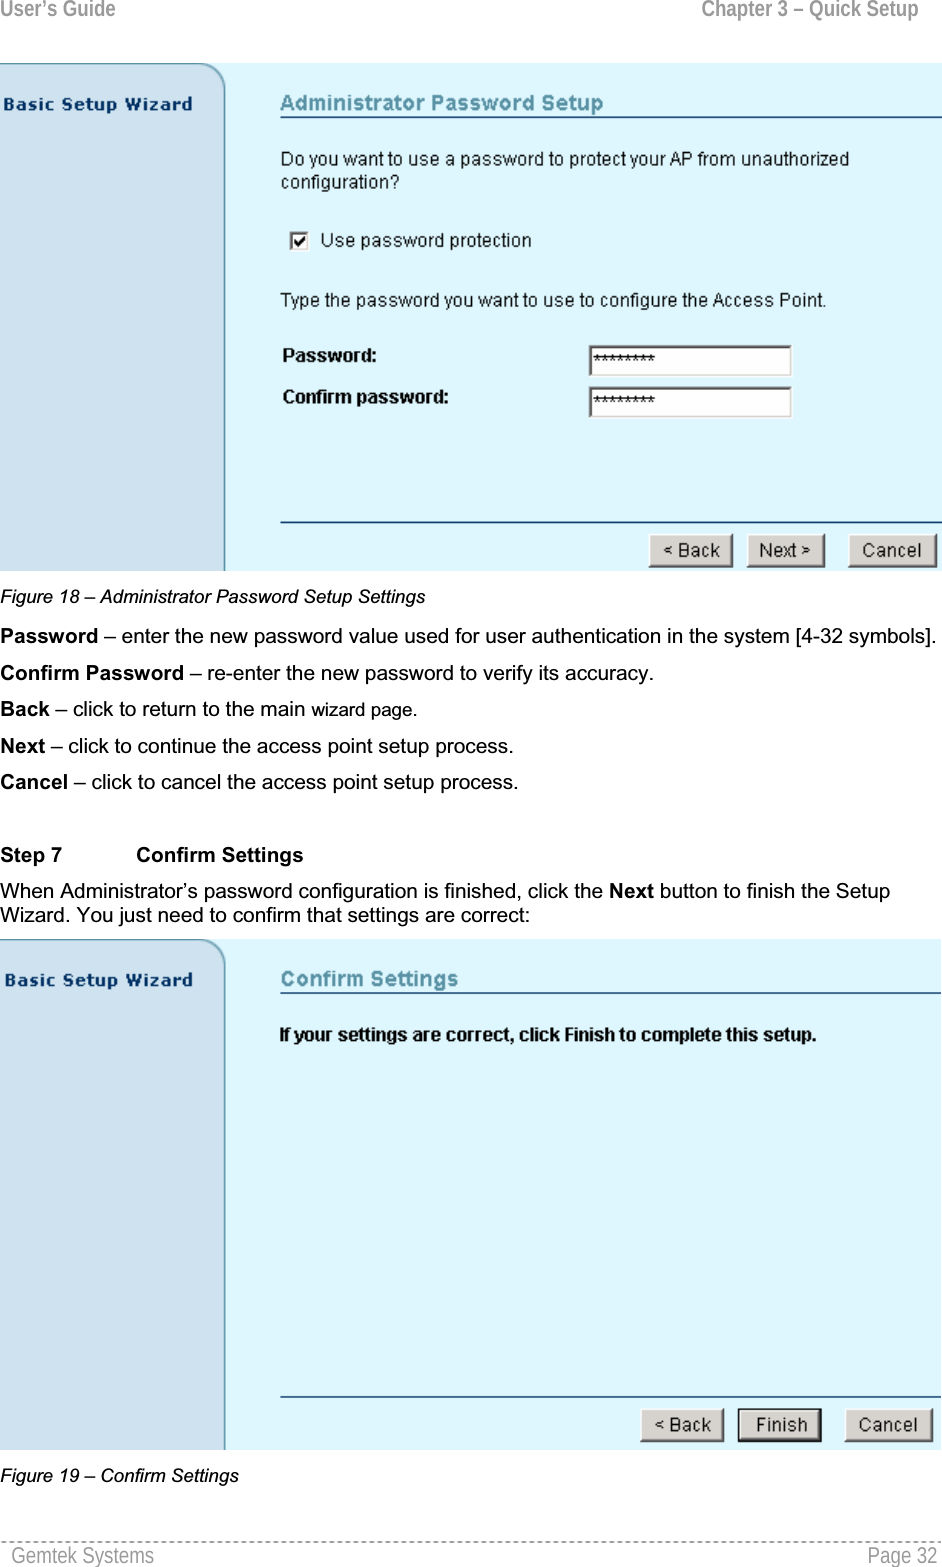 User’s Guide  Chapter 3 – Quick SetupFigure 18 – Administrator Password Setup Settings Password – enter the new password value used for user authentication in the system [4-32 symbols].Confirm Password – re-enter the new password to verify its accuracy.Back – click to return to the main wizard page.Next – click to continue the access point setup process.Cancel – click to cancel the access point setup process.Step 7  Confirm Settings When Administrator’s password configuration is finished, click the Next button to finish the Setup Wizard. You just need to confirm that settings are correct:Figure 19 – Confirm SettingsGemtek Systems  Page 32